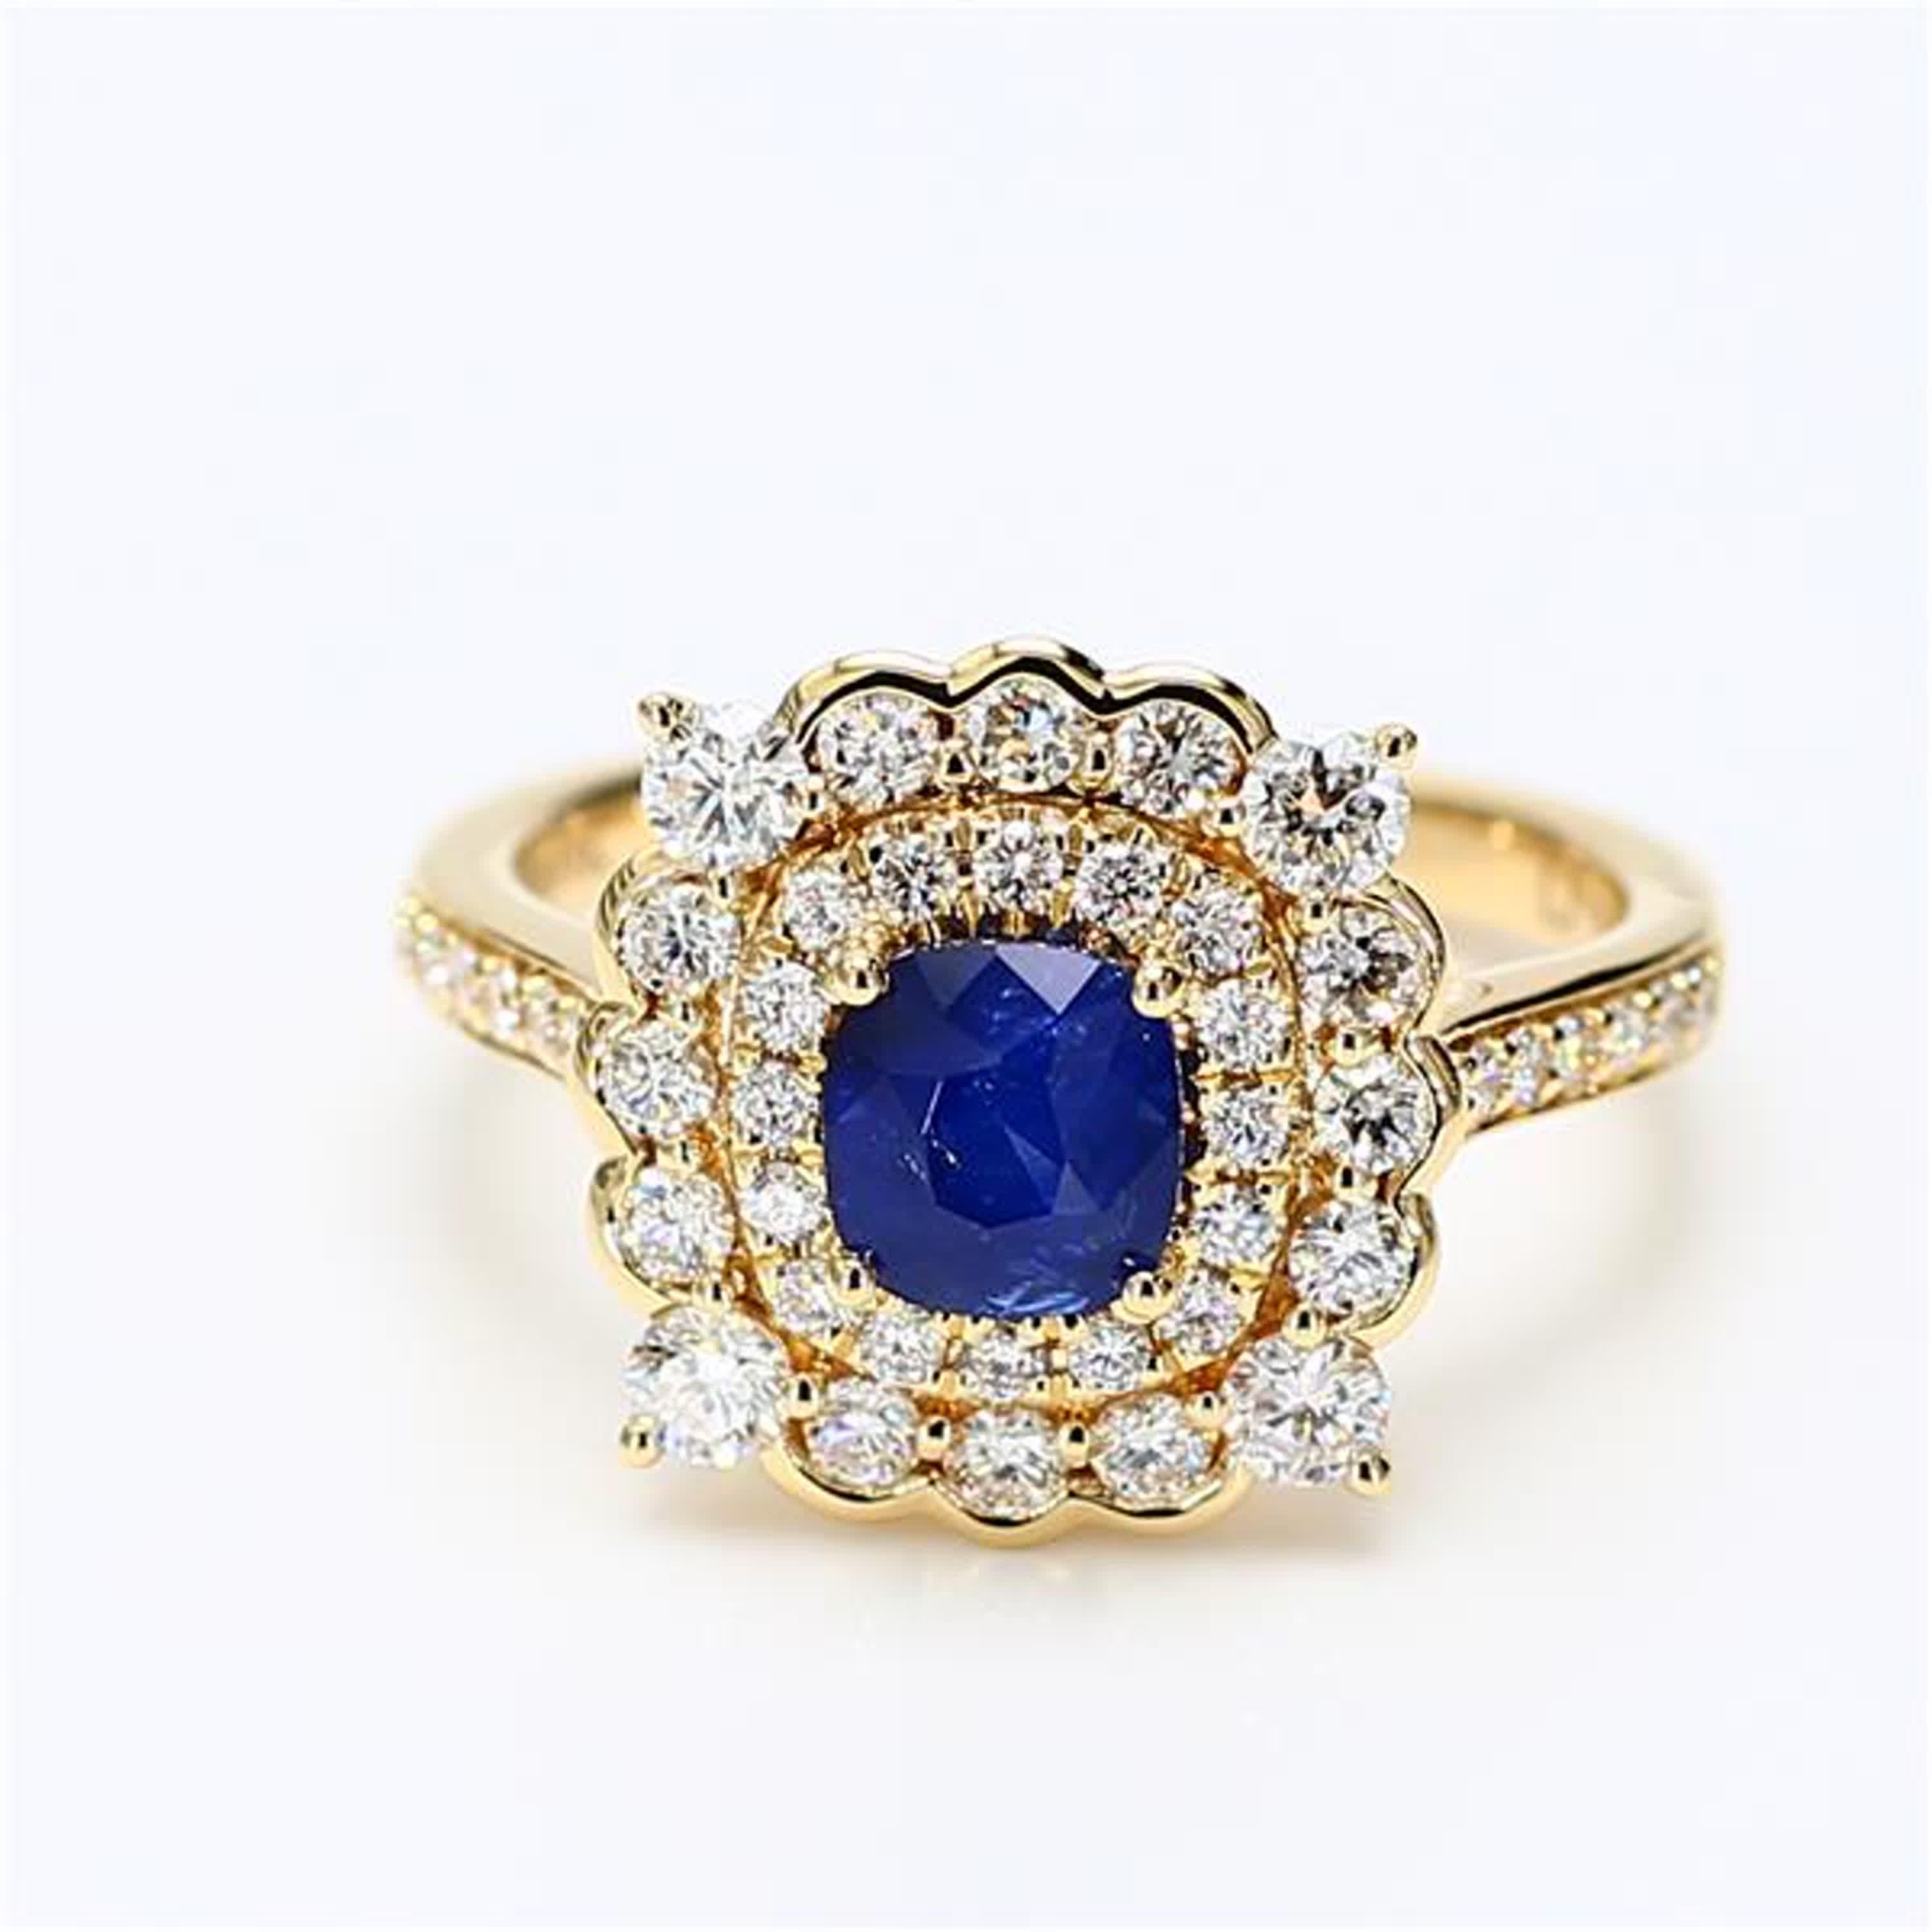 RareGemWorld's classic sapphire ring. Mounted in a beautiful 18K Yellow Gold setting with a natural cushion cut blue sapphire. The sapphire is surrounded by natural round white diamond melee. This ring is guaranteed to impress and enhance your